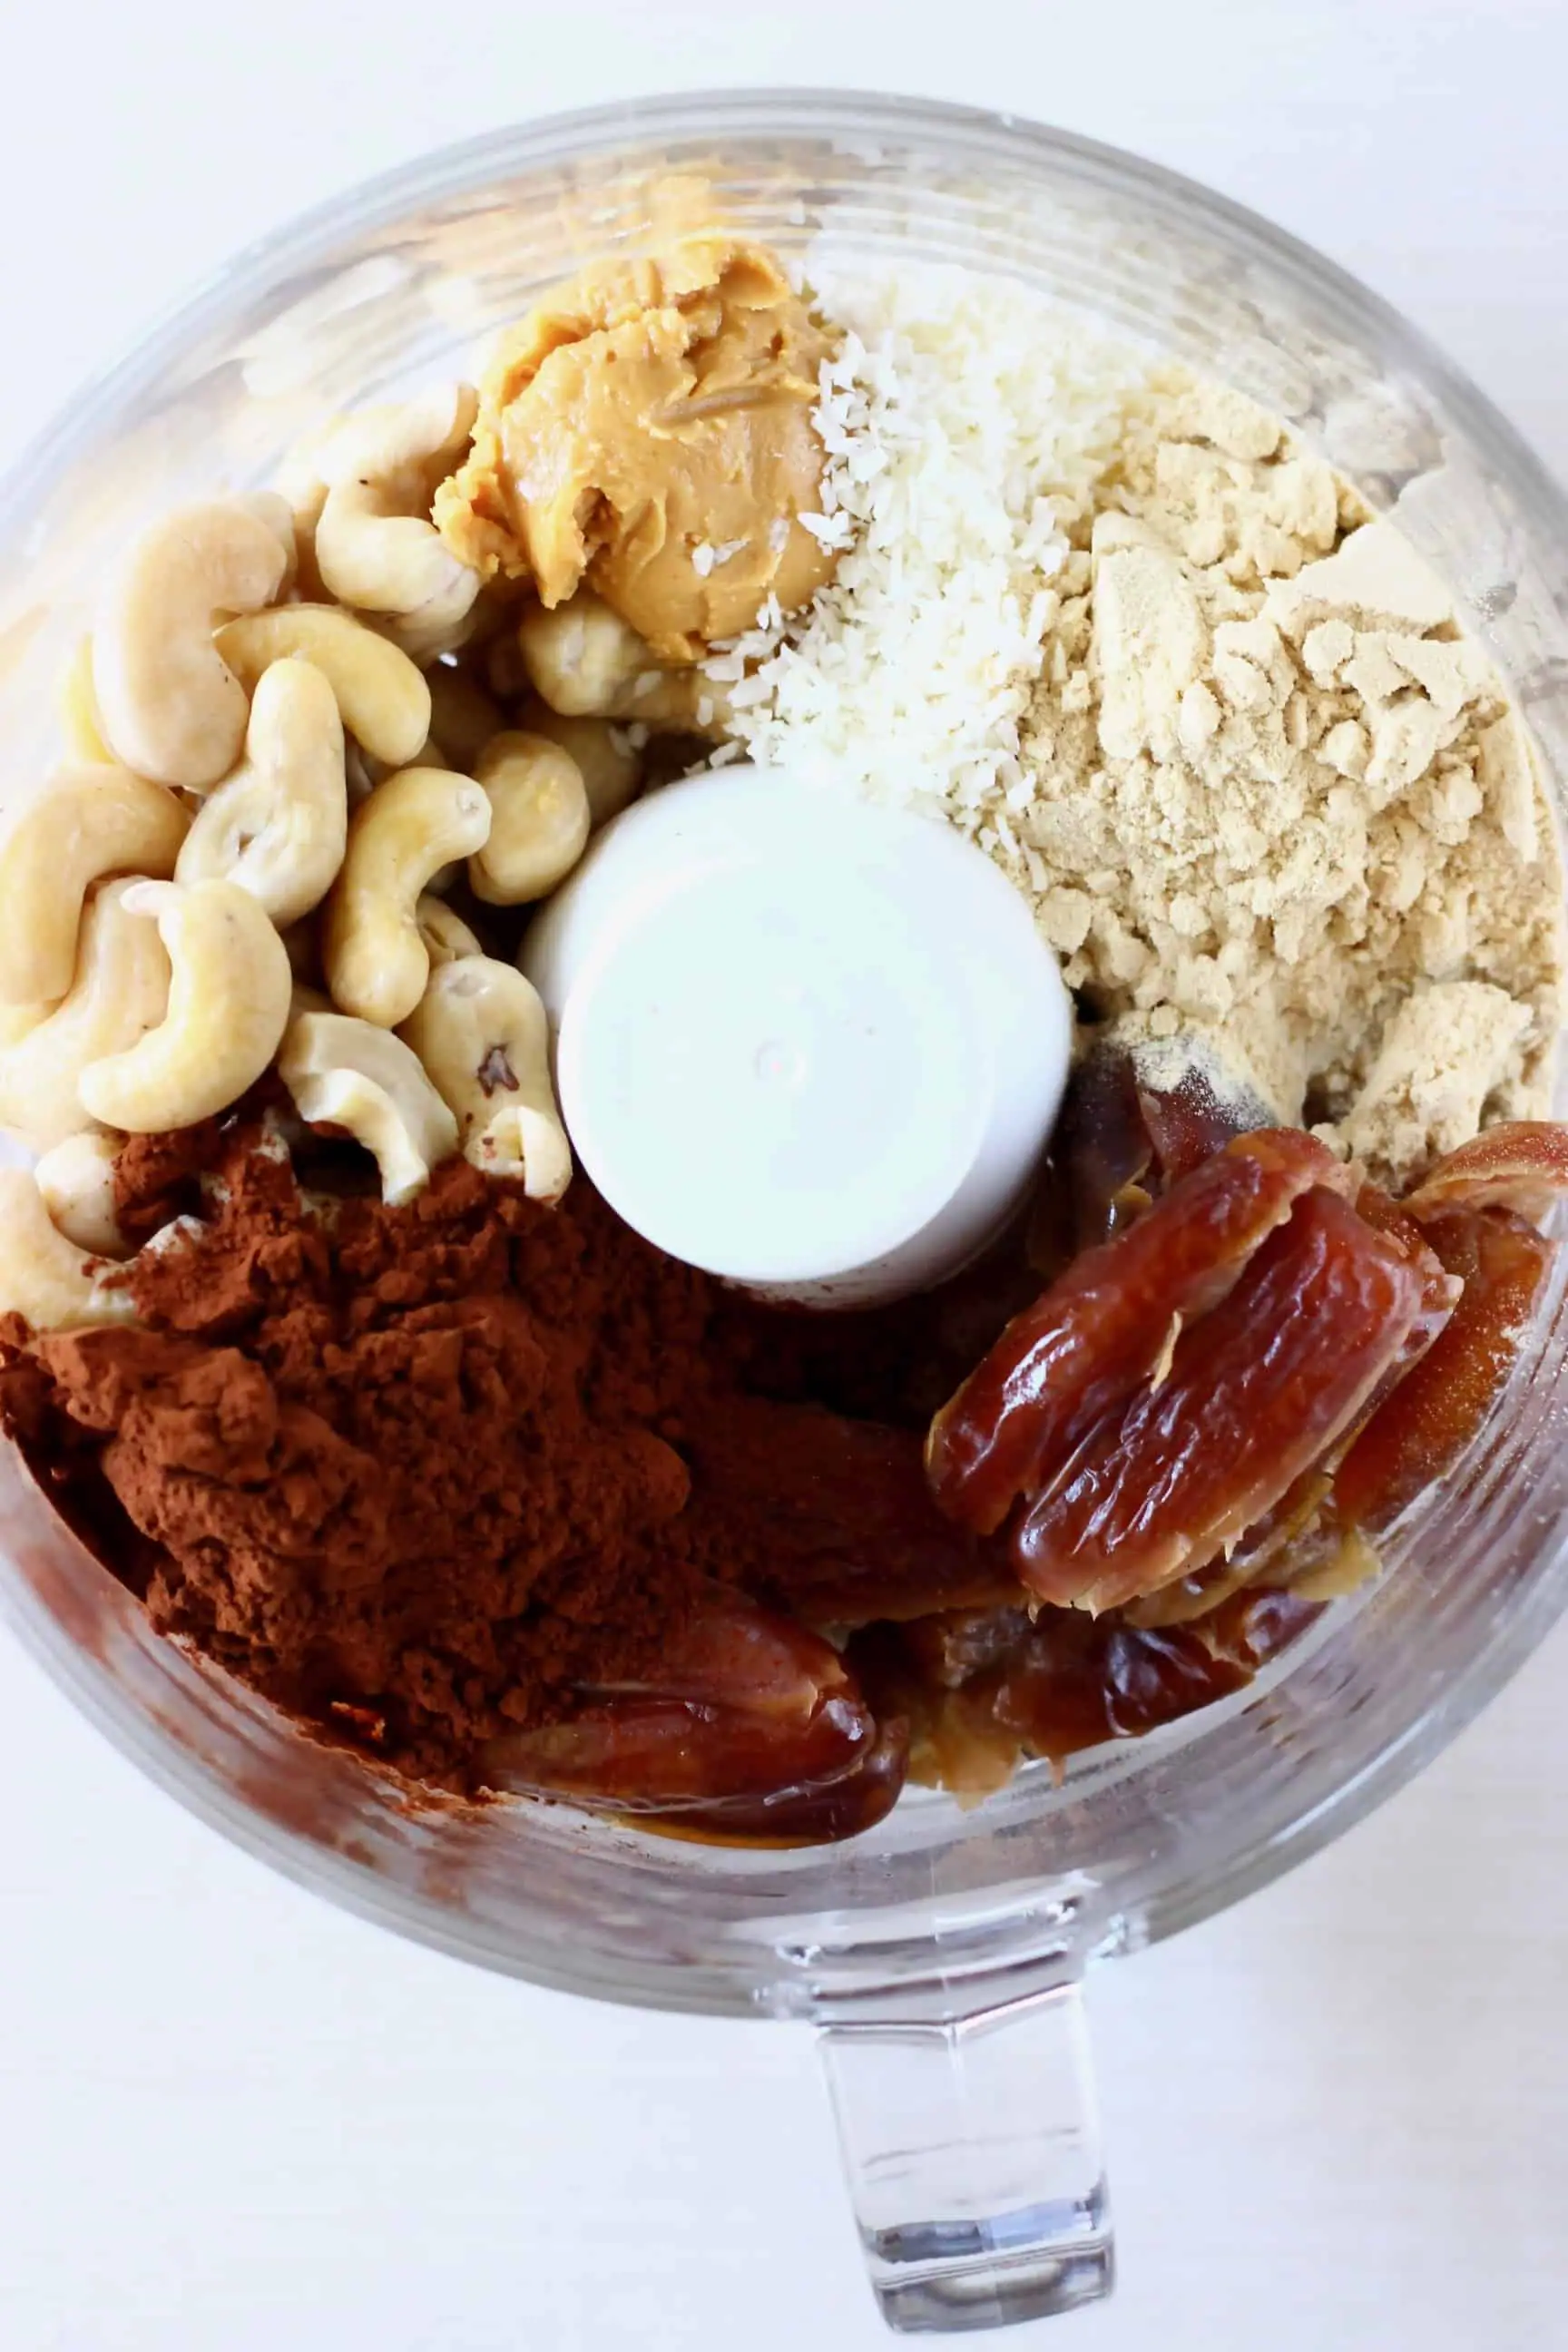 Dates, cashews, almond buter, desiccated coconut, cocoa powder and protein powder in a food processor against a white background